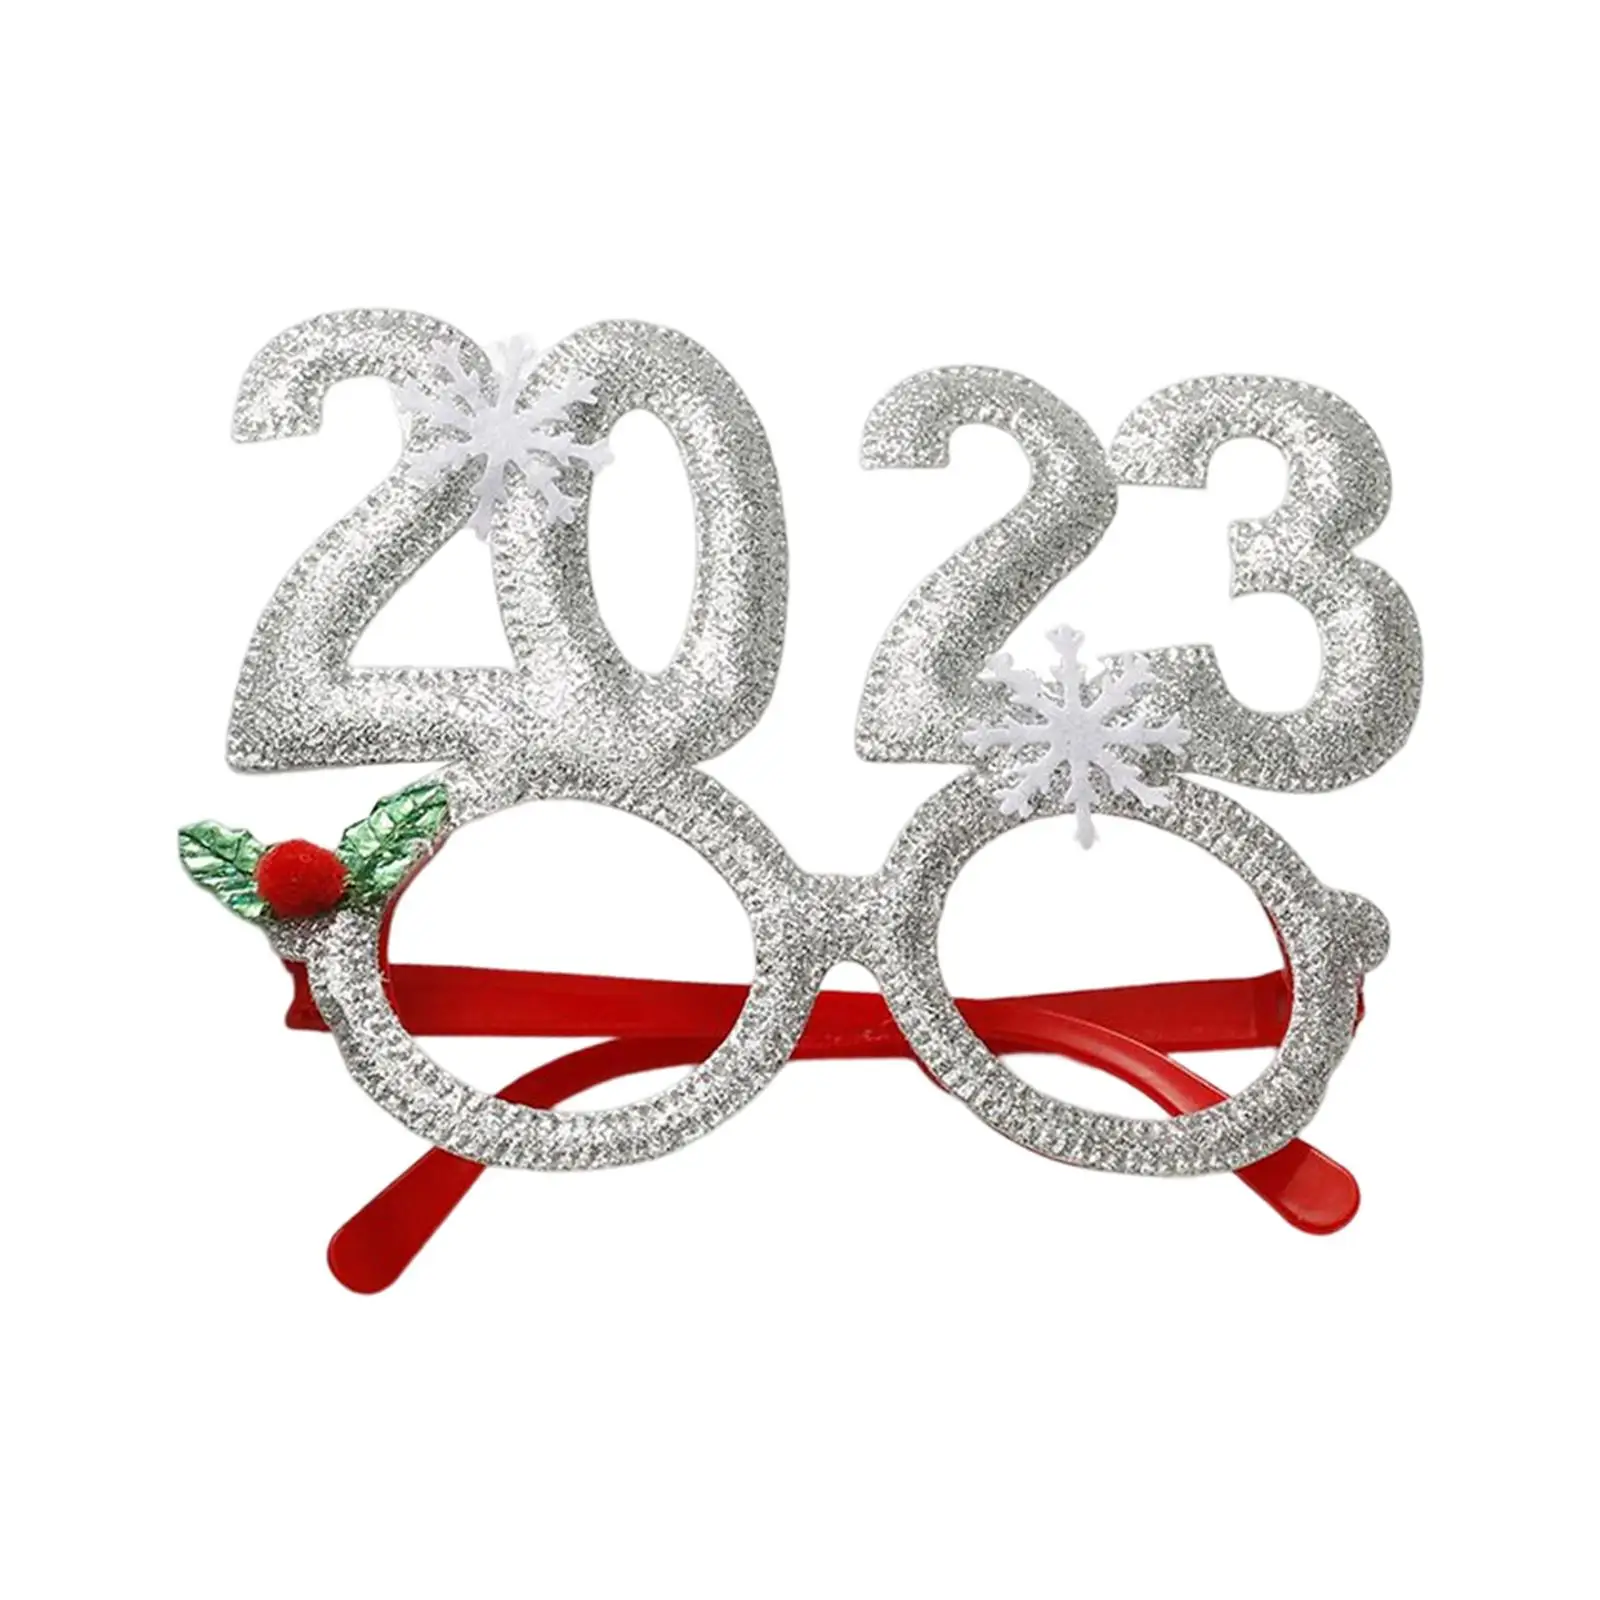 Christmas Glasses Frame 2023 Photo Prop Flexibility Funny for Boys and Girls